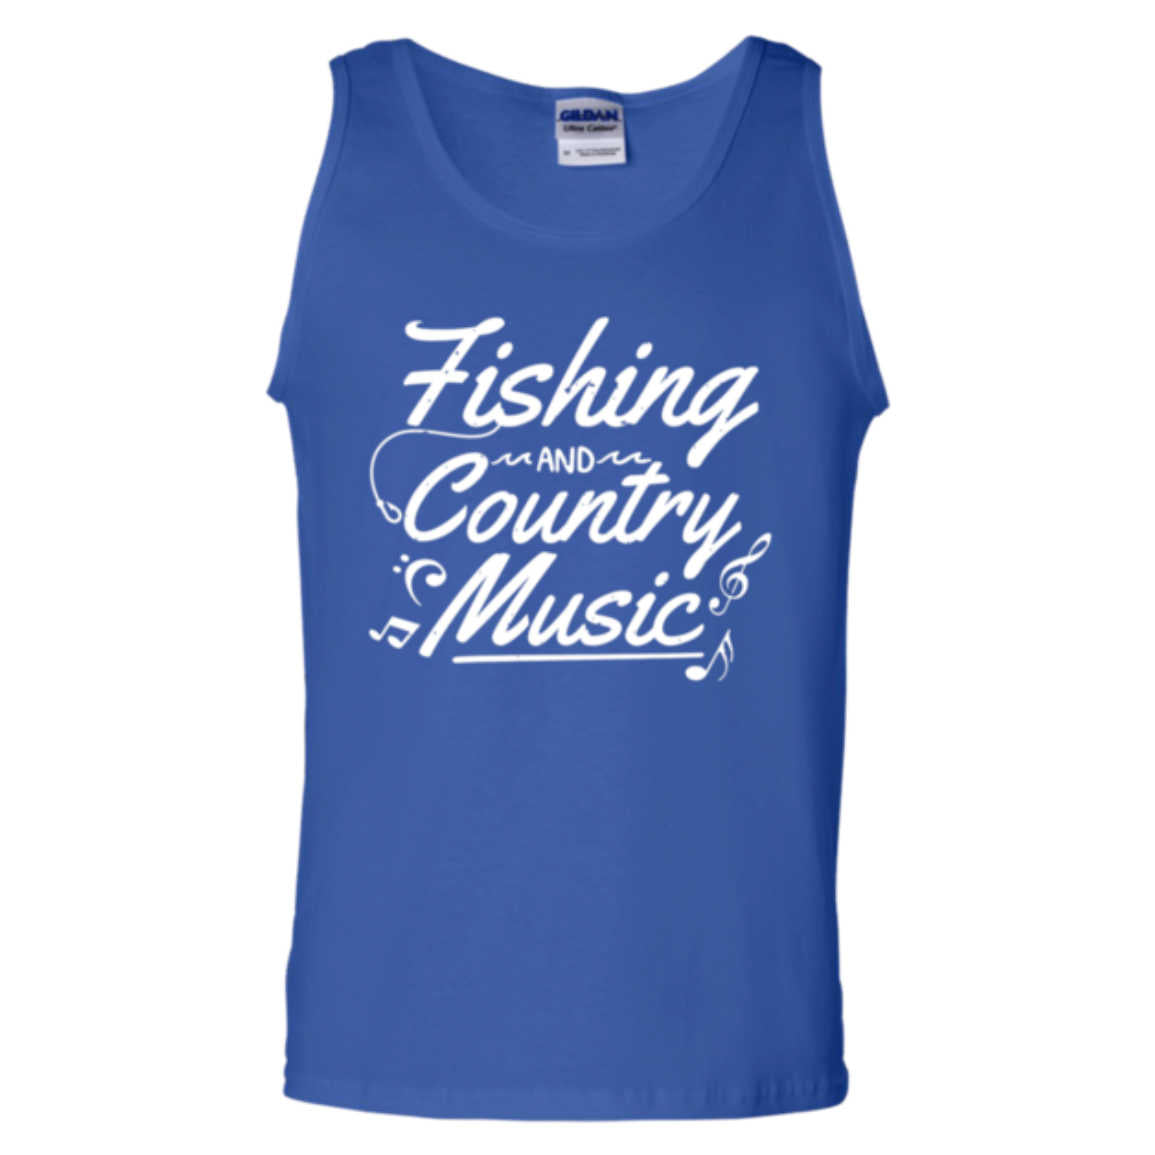 fishing and country Music tank top w royal